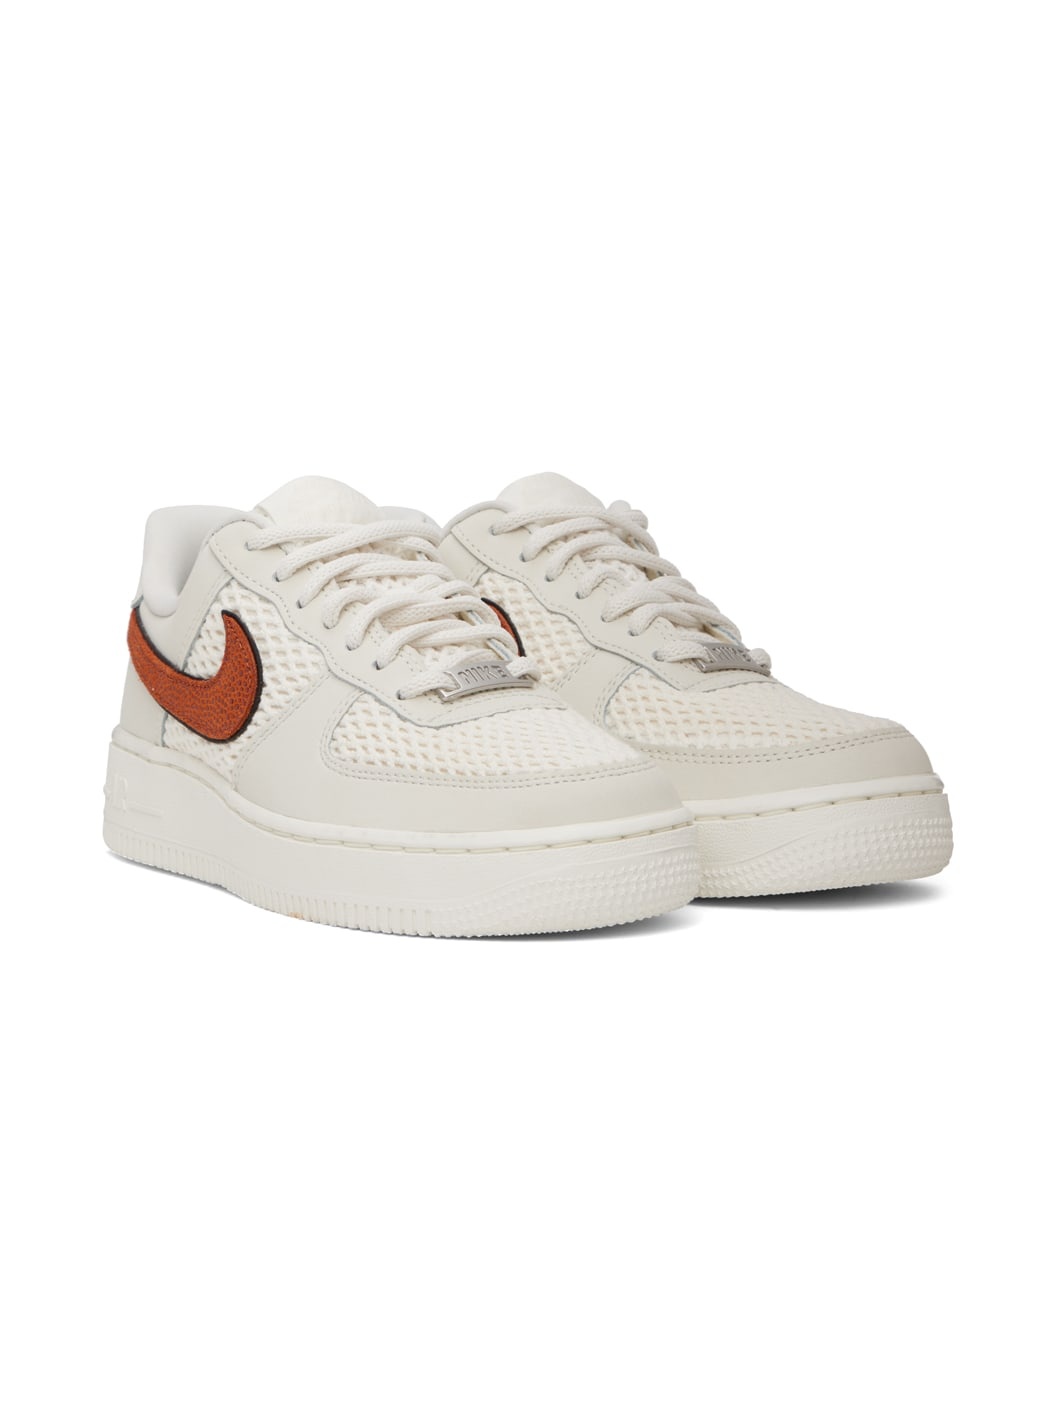 White & Gray Air Force 1 '07 Basketball Sneakers - 4